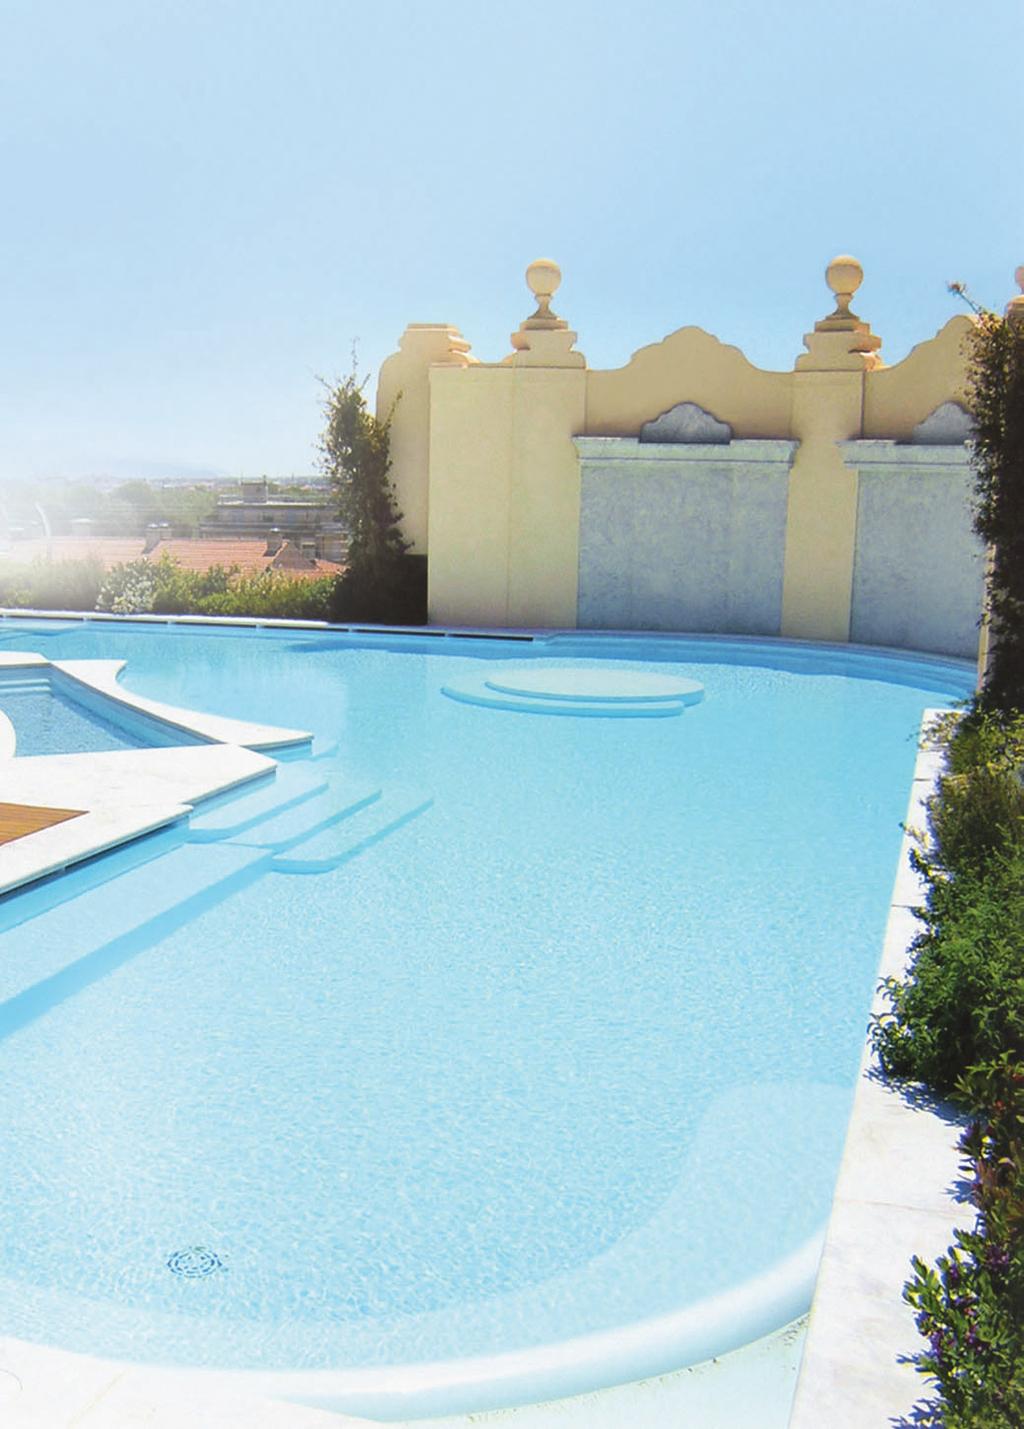 3 For the past forty years, Culligan Italiana has been designing stateof-the-art swimming-pools with outstanding technical and aesthetic qualities.